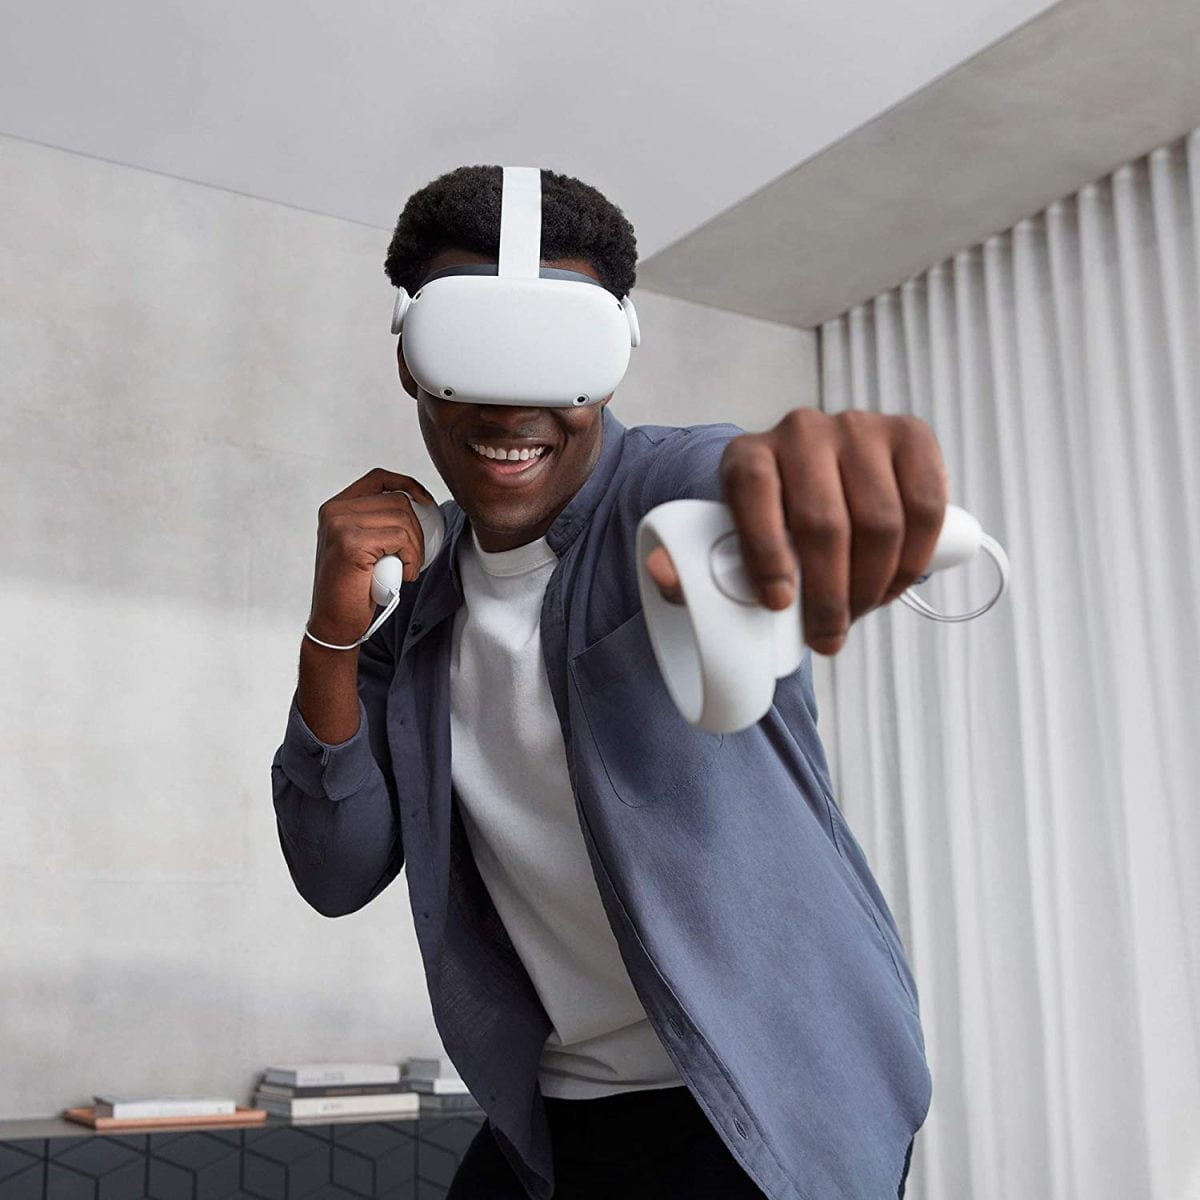 Oculus Https://Youtu.be/Atvgl9Wojsm Oculus Quest 2 Oculus Quest 2 256 Gb With Oculus Link Cable 5M Plus Advanced All-In-One Virtual Reality Headset (Combo Offer)